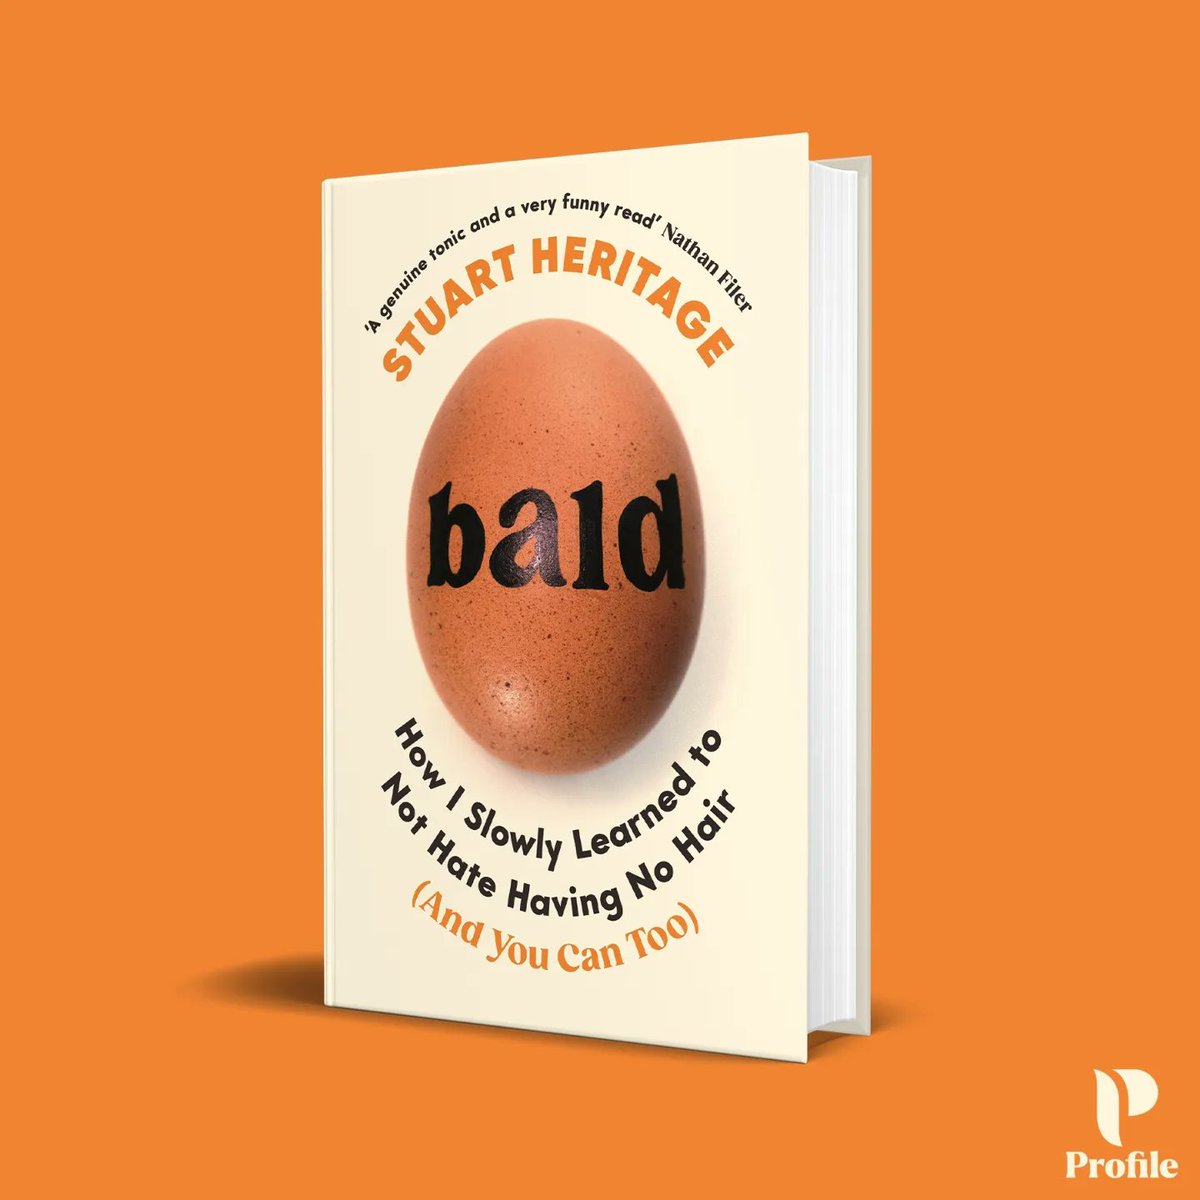 My new book Bald - about all the weird things that start to happen to you when you lose your hair - is published today. I hope you enjoy reading it, and that the bald man in your life doesn't get upset when you buy it for him as a gift uk.bookshop.org/p/books/bald-h…